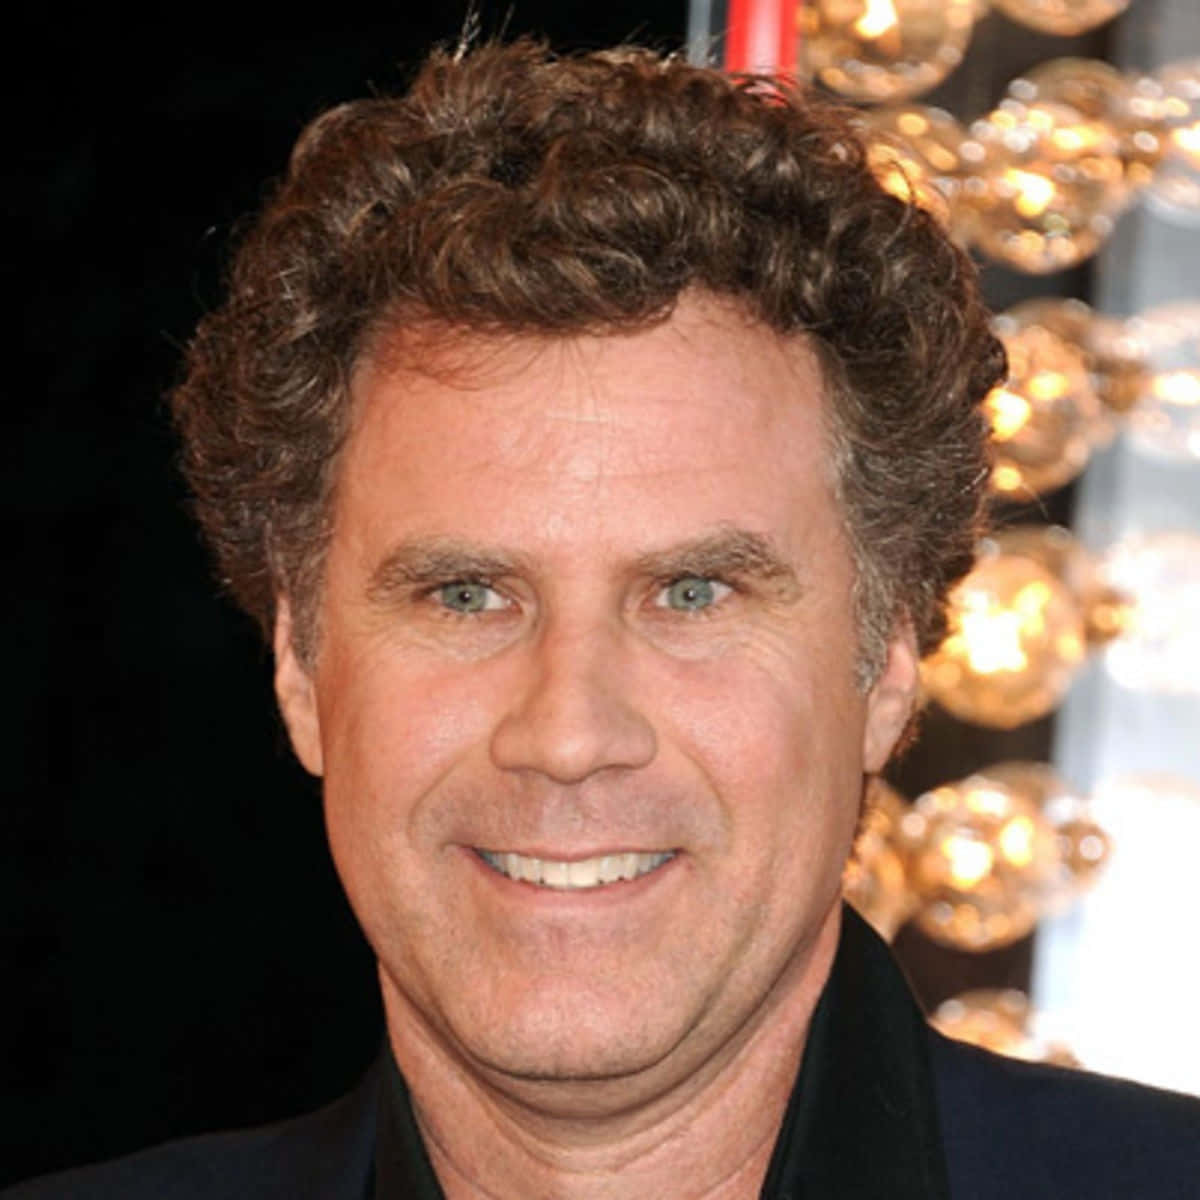 Comedic Genius Will Ferrell Smiling in a Suit and Tie Wallpaper